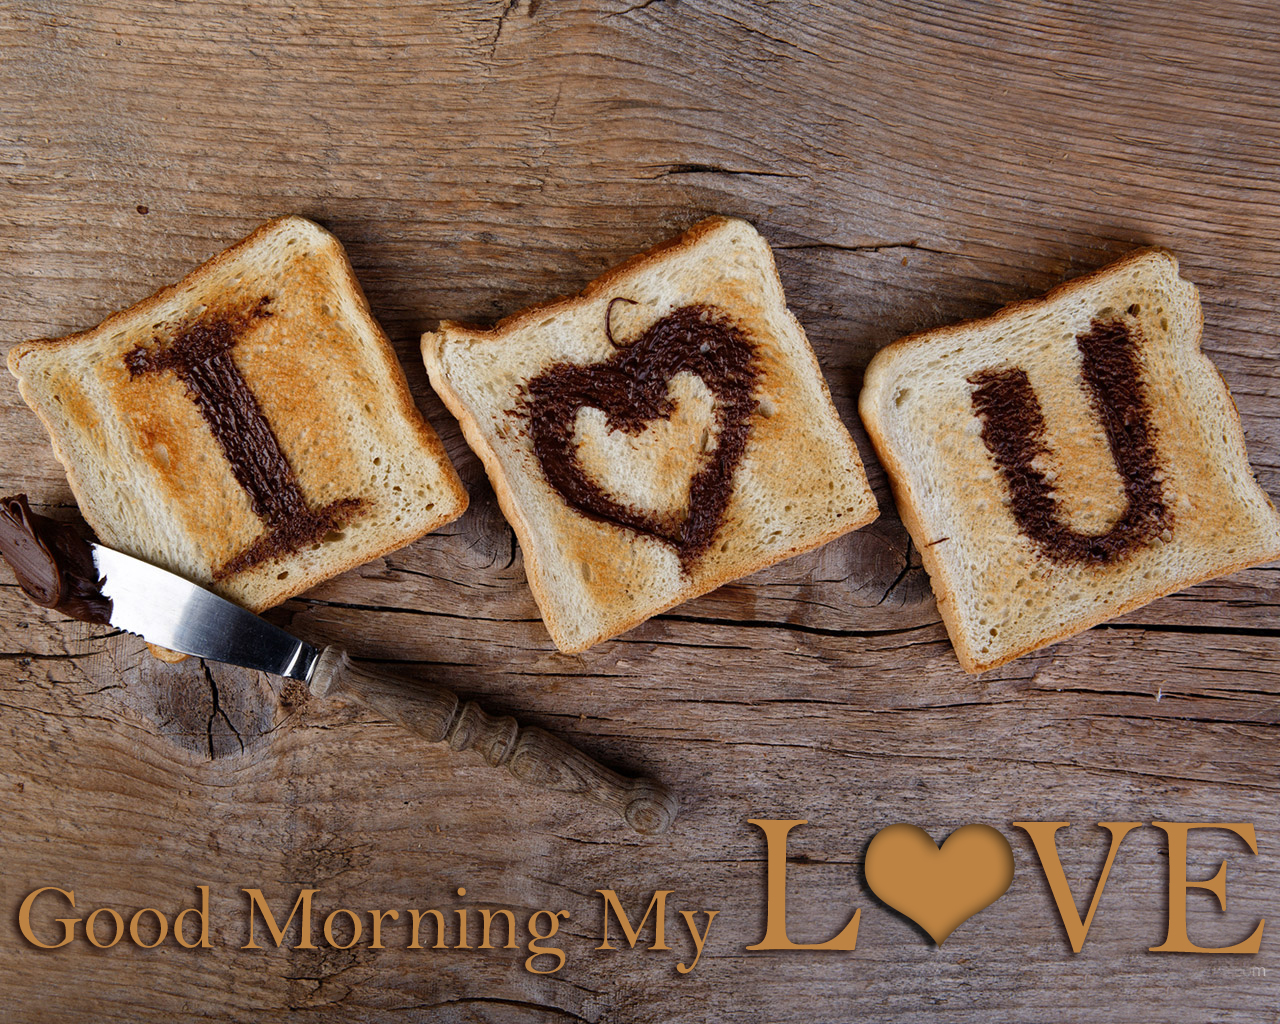 my name love wallpaper,food,cuisine,dish,baked goods,toast